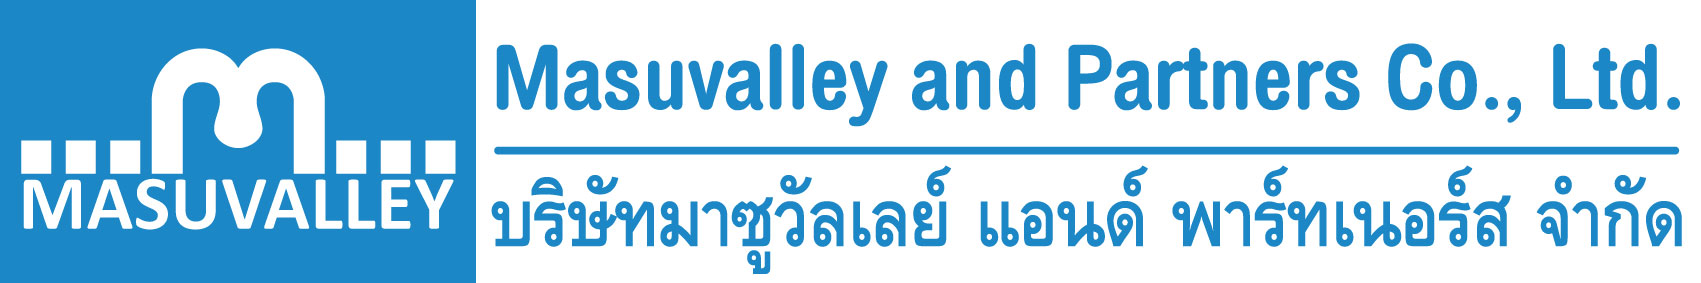 picture ภาพประกอบ Masuvalley and Partners Co., Ltd. 